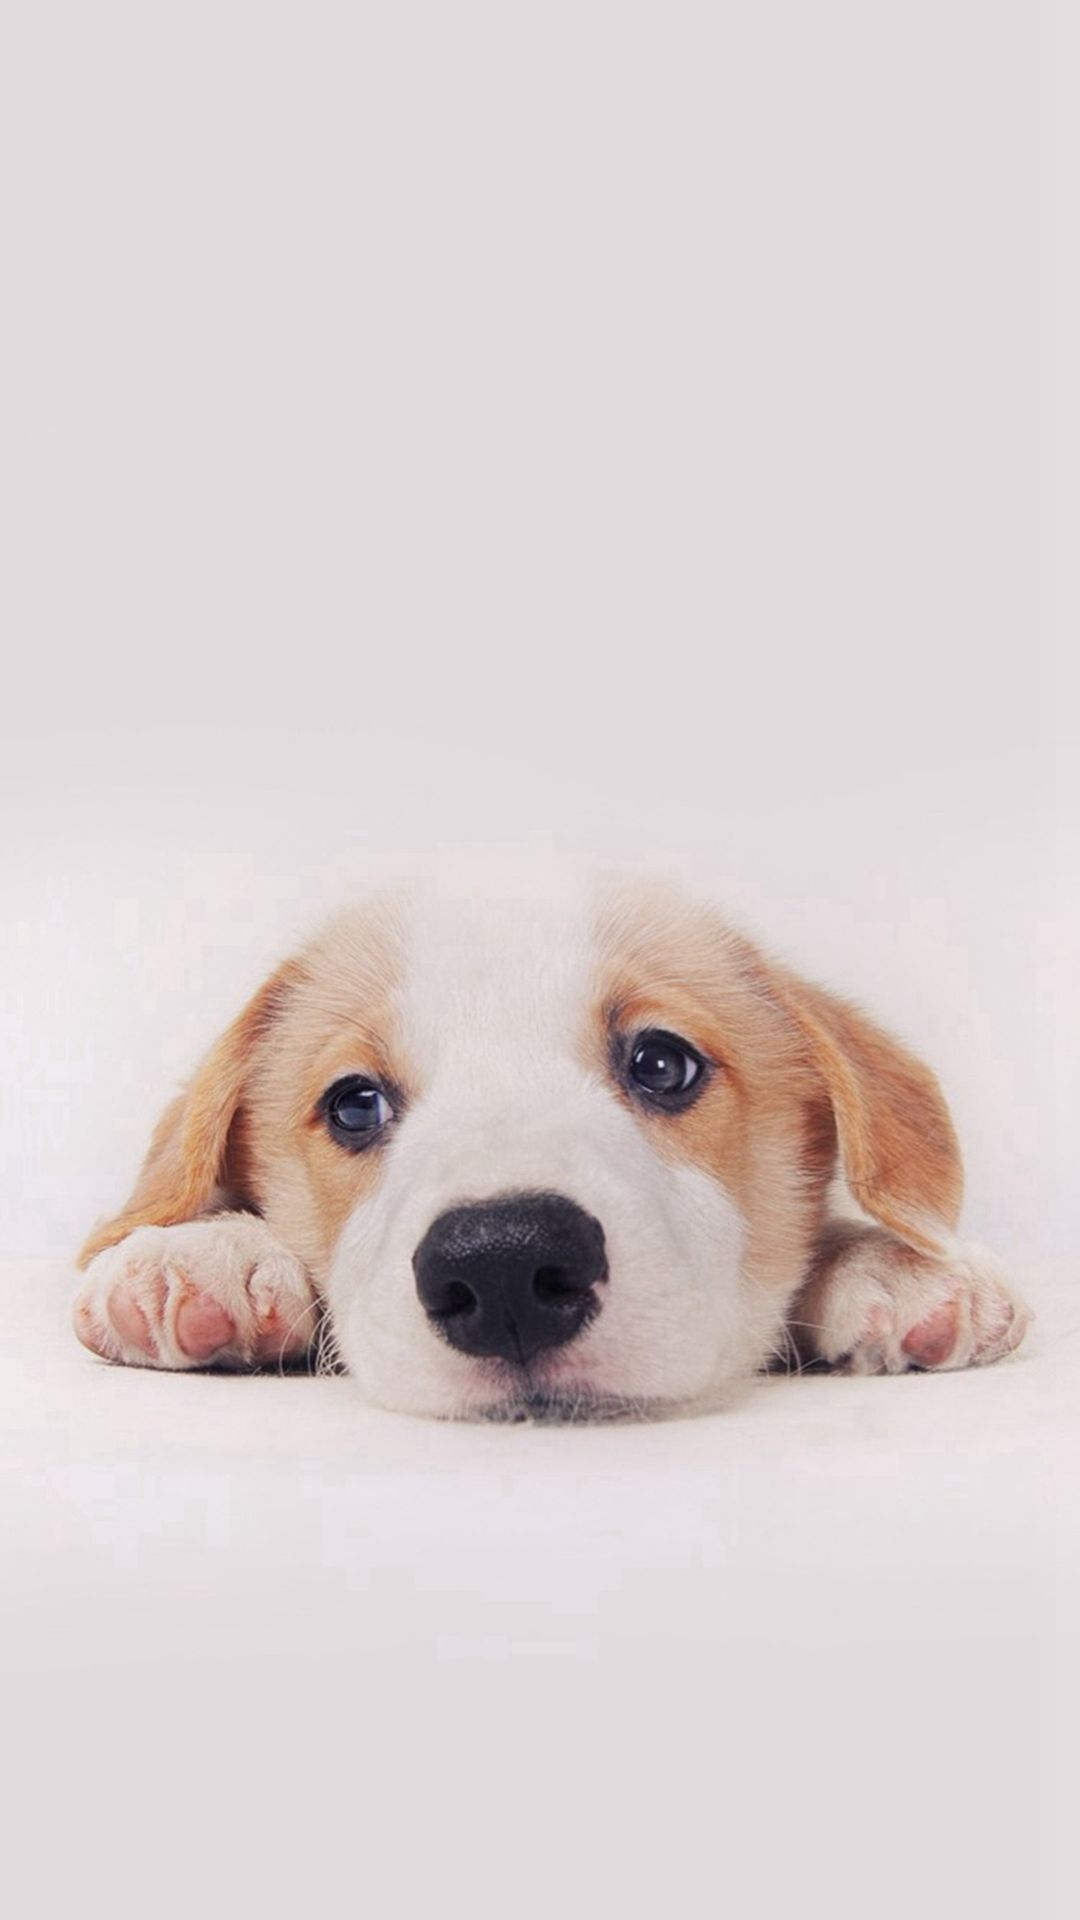 Cute Dog Wallpapers   Top Free Cute Dog Backgrounds